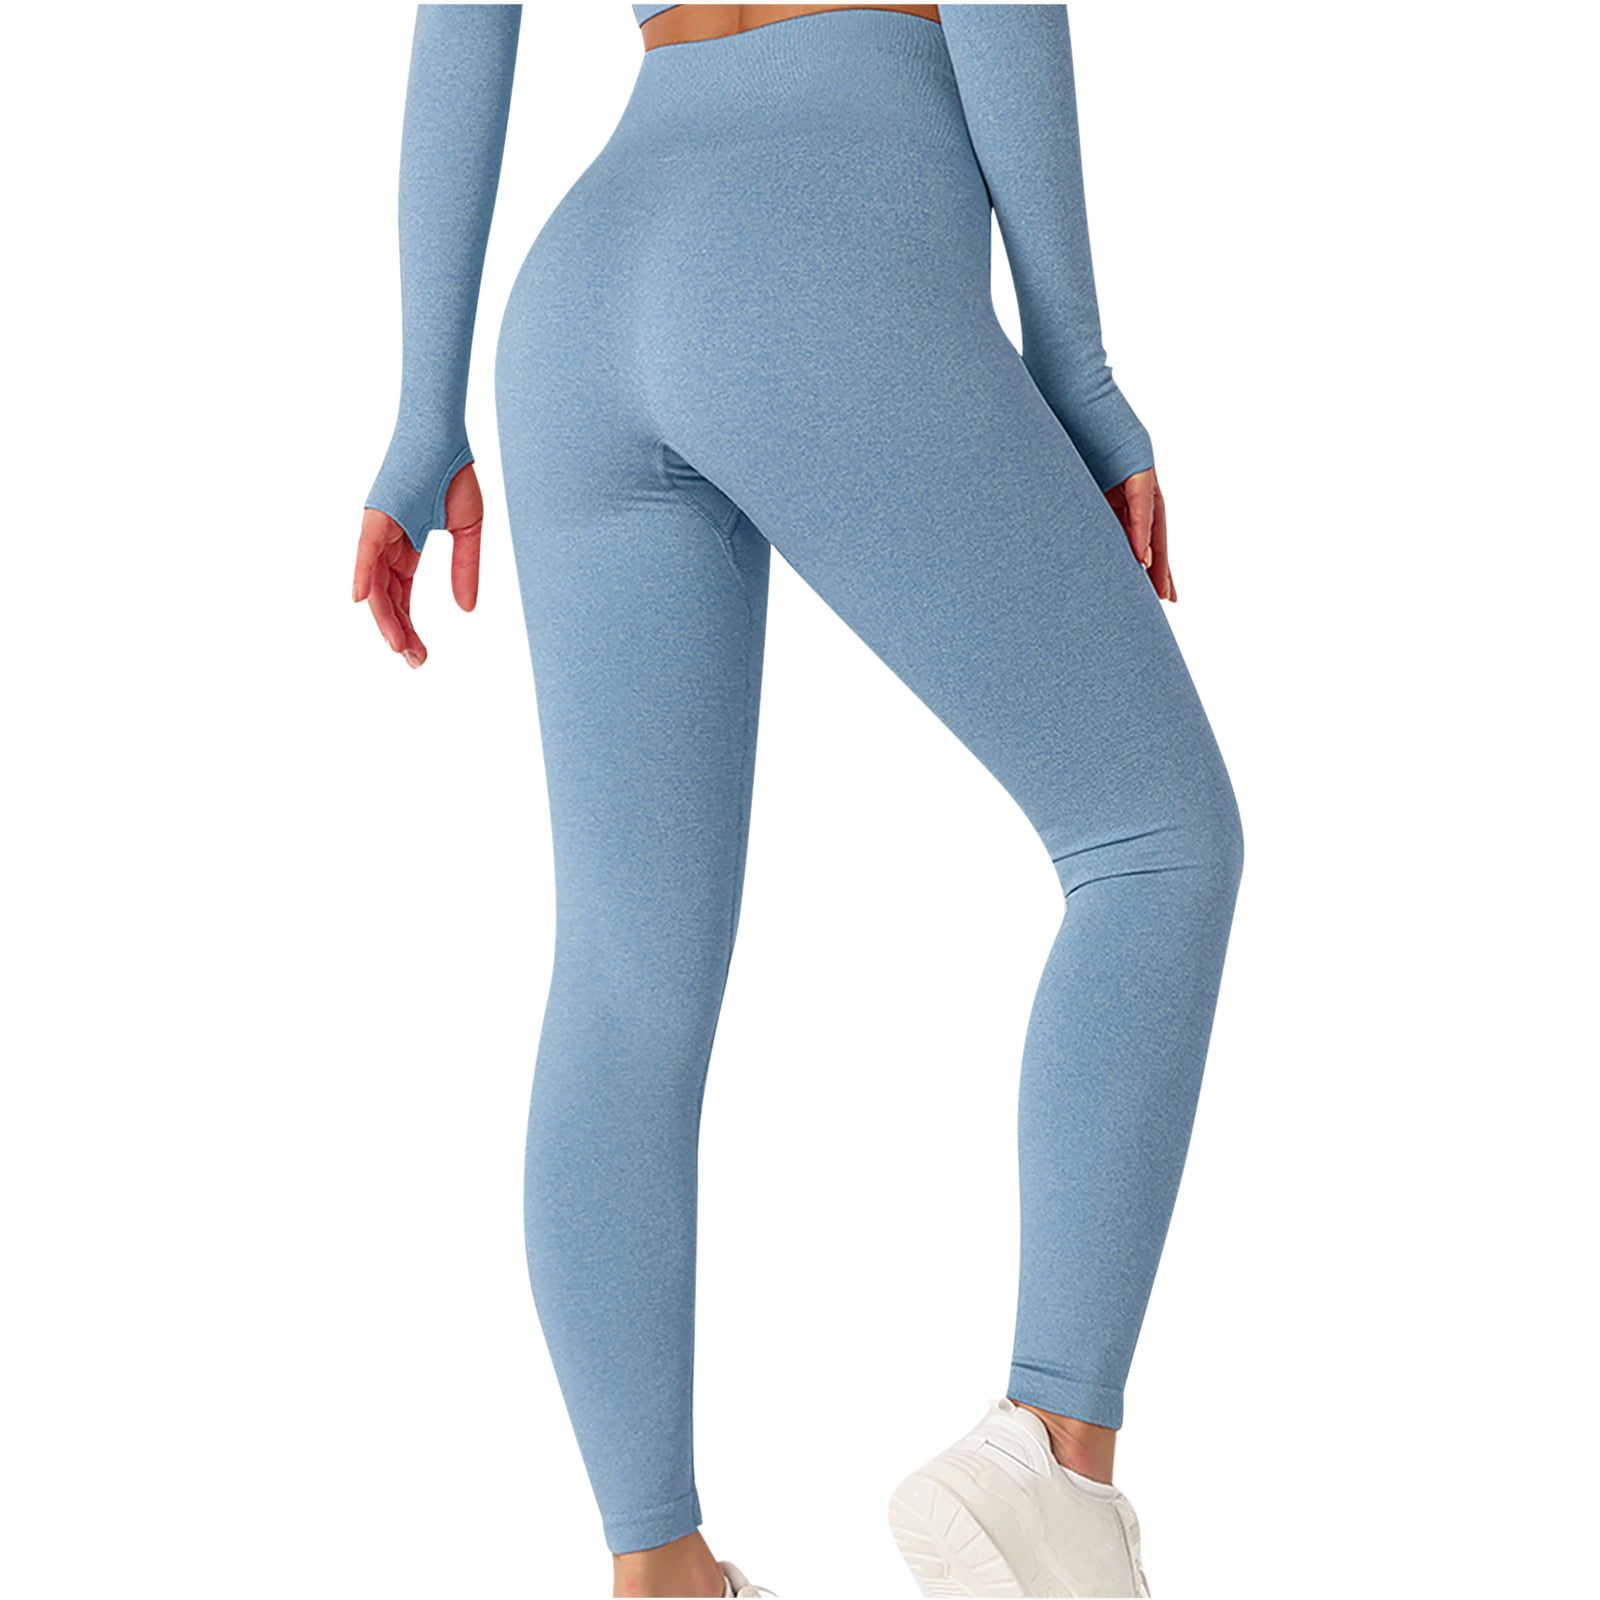 HAPIMO Savings Women's Yoga Pants High Waist Tummy Control Workout Pants  Hip Lift Tights Stretch Athletic Slimming Running Yoga Leggings for  Womenwith